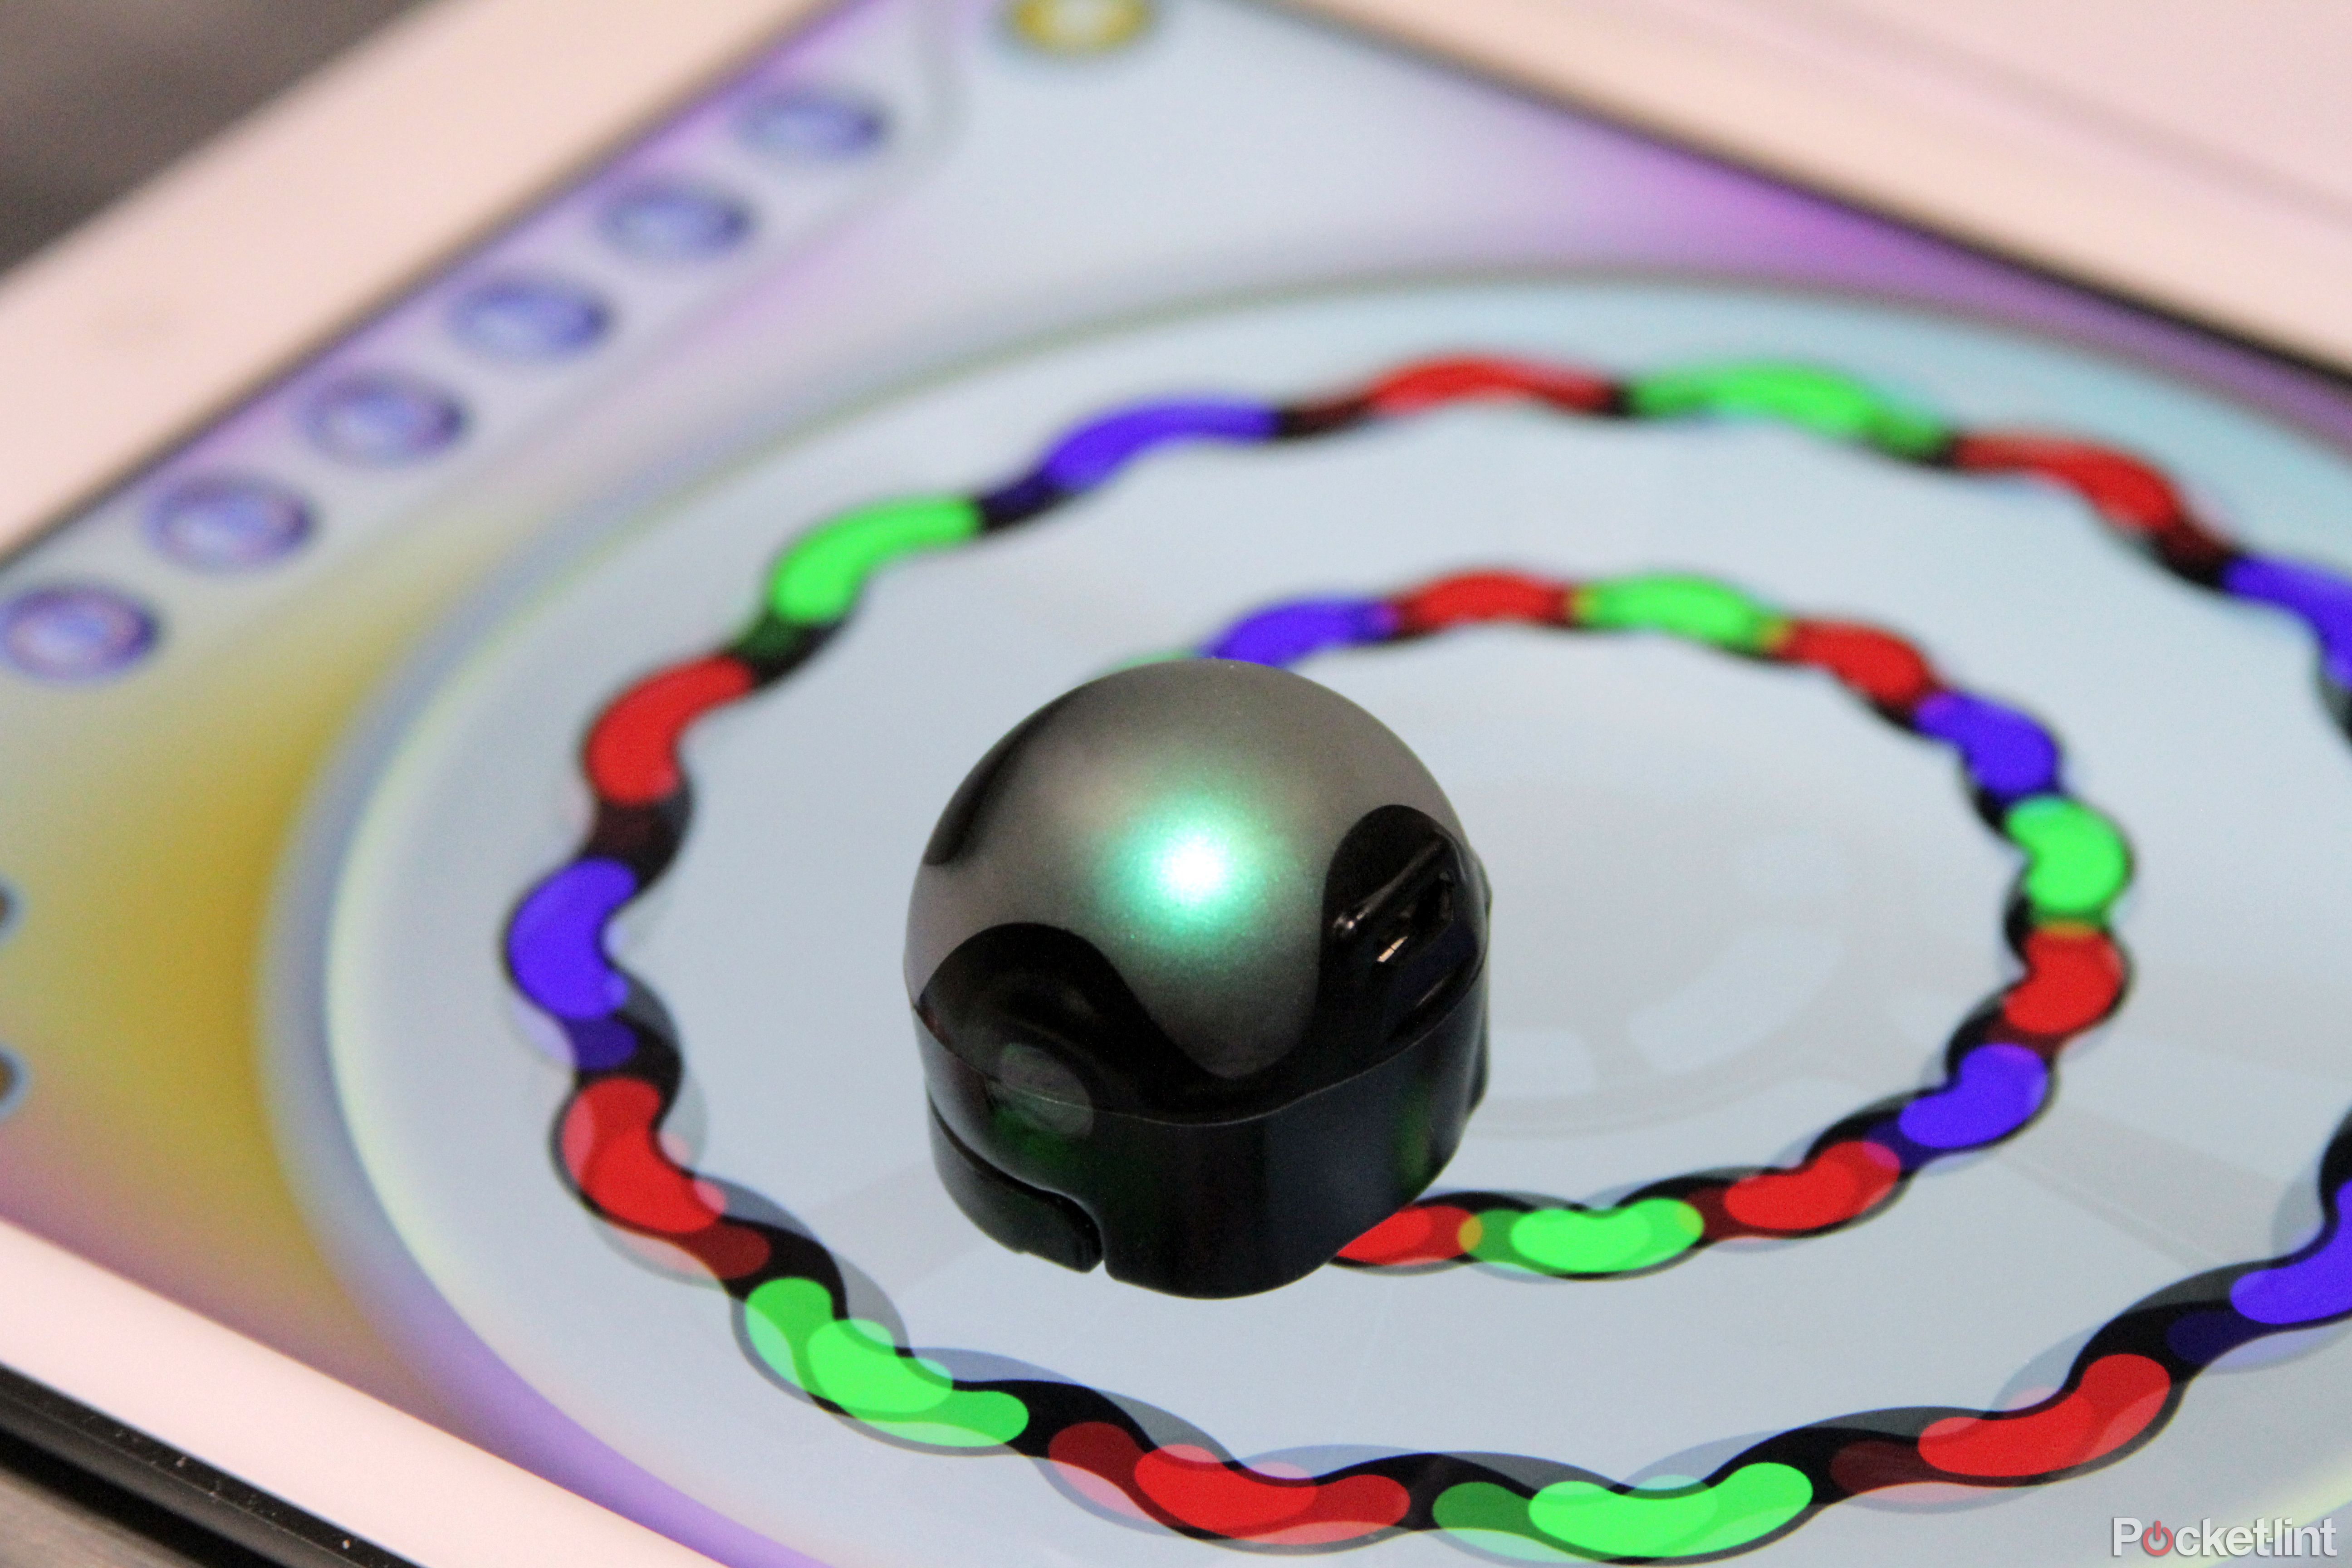 https://static0.pocketlintimages.com/wordpress/wp-content/uploads/wm/127321-apps-news-hands-on-hands-on-ozobot-s-multi-surface-small-robot-and-apps-for-ios-review-image11-ZjM5bFXPHf.jpg